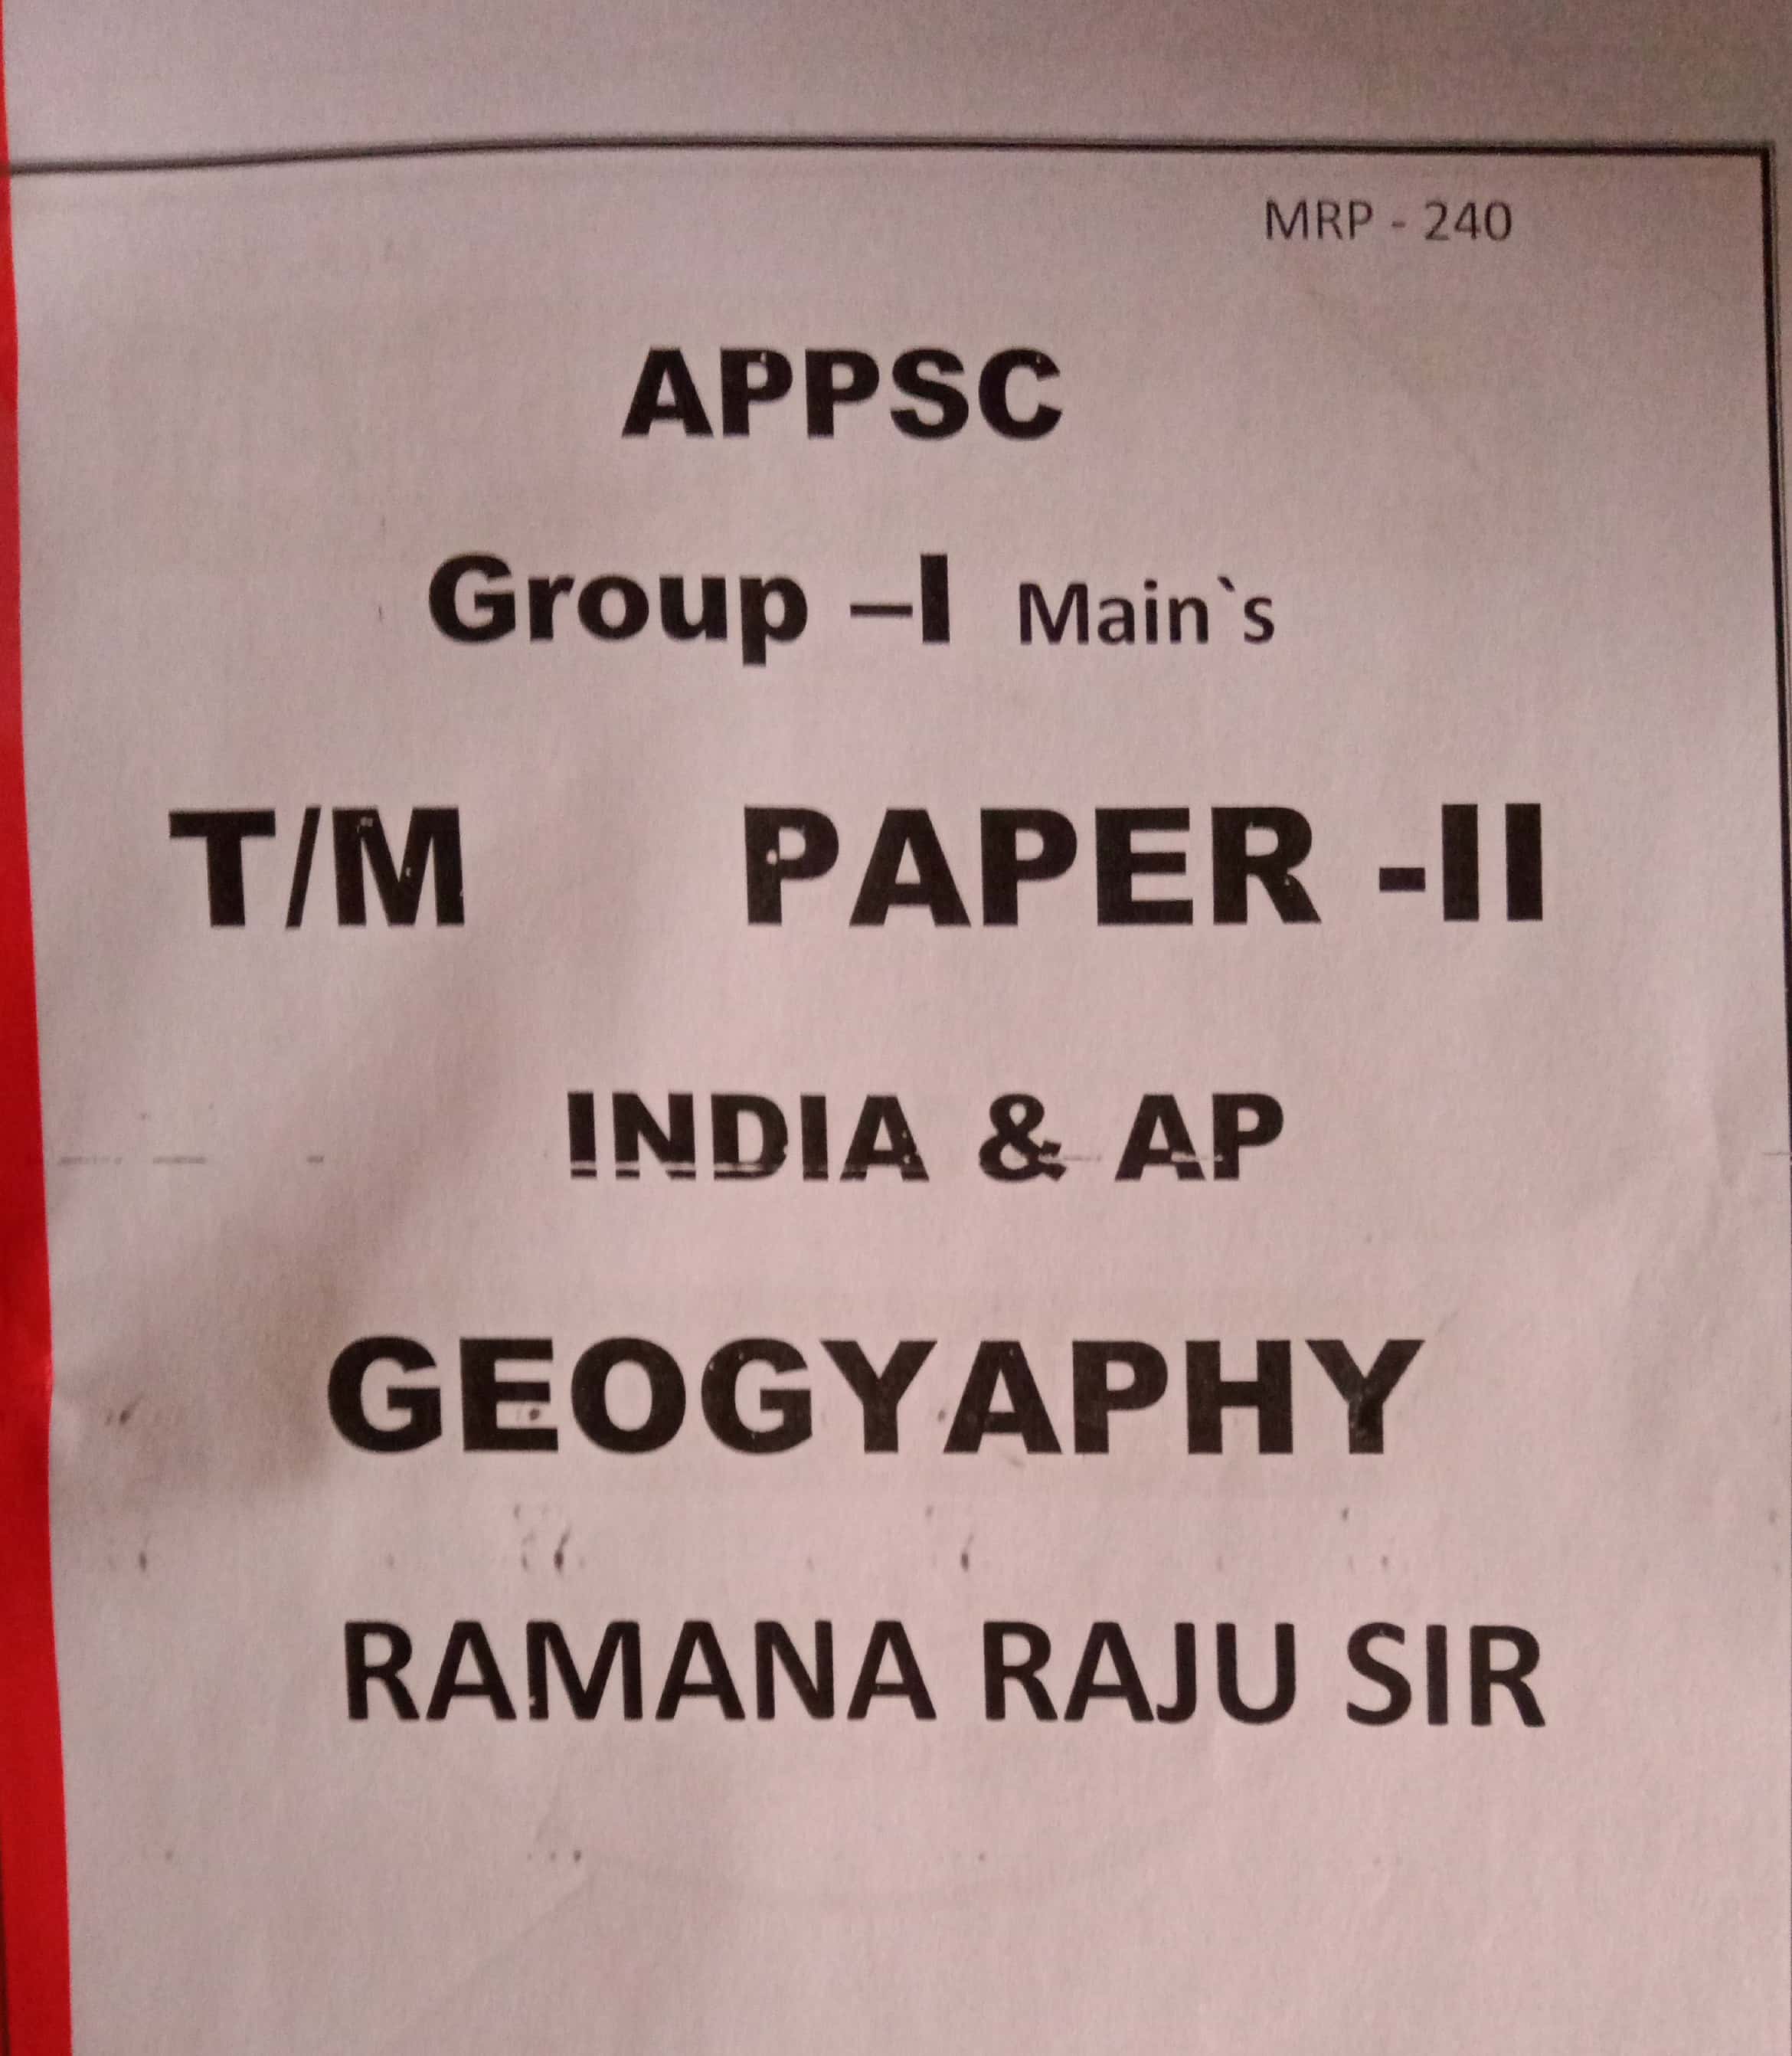 APPSC Group-1 Mains, India & AP Geography Xerox Printed Material[Telugu Medium] Xerox Printed Material